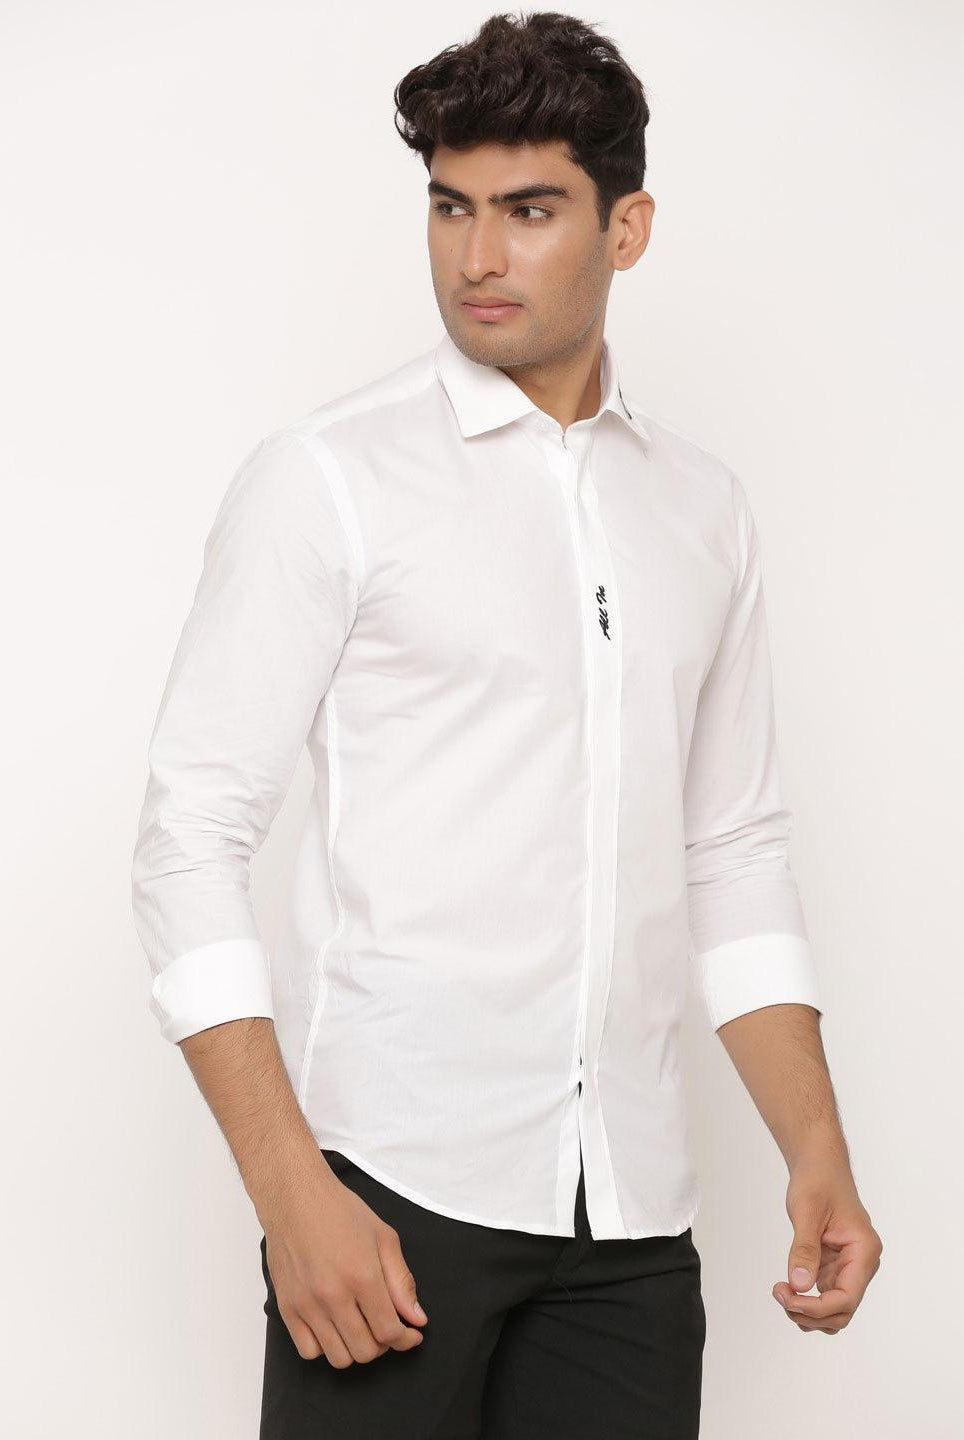 All In With Poker Chip Embroidered White Shirt - Tistabene